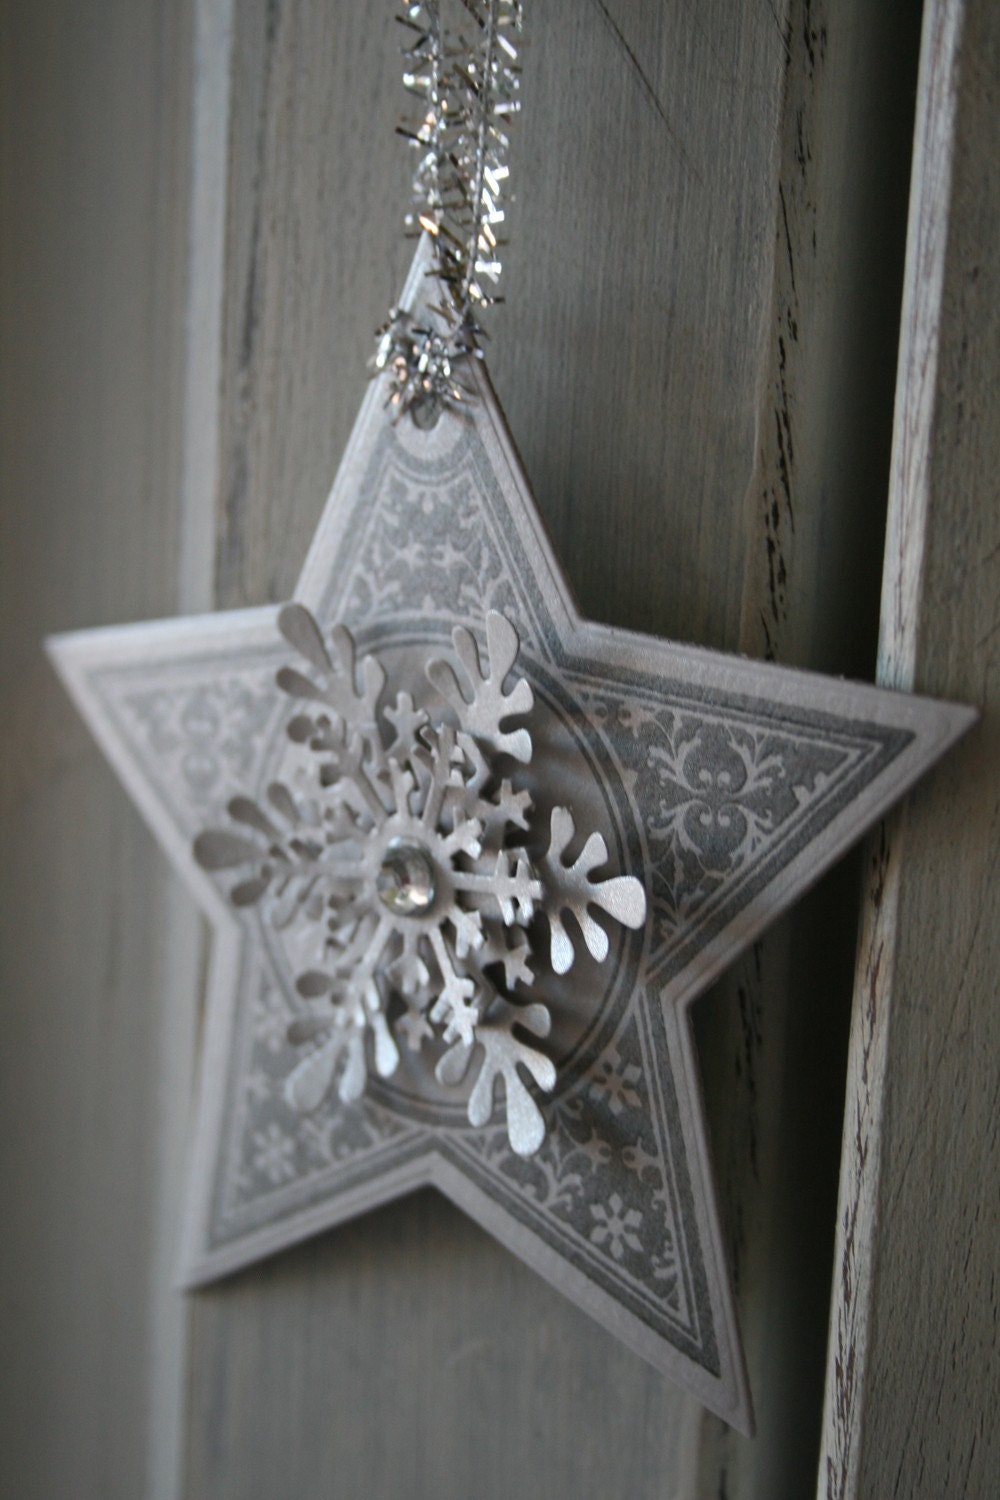 NEW - Star/ Snowflake Ornaments - Gift tags, labels - Christmas, winter, New Year - Set of 10